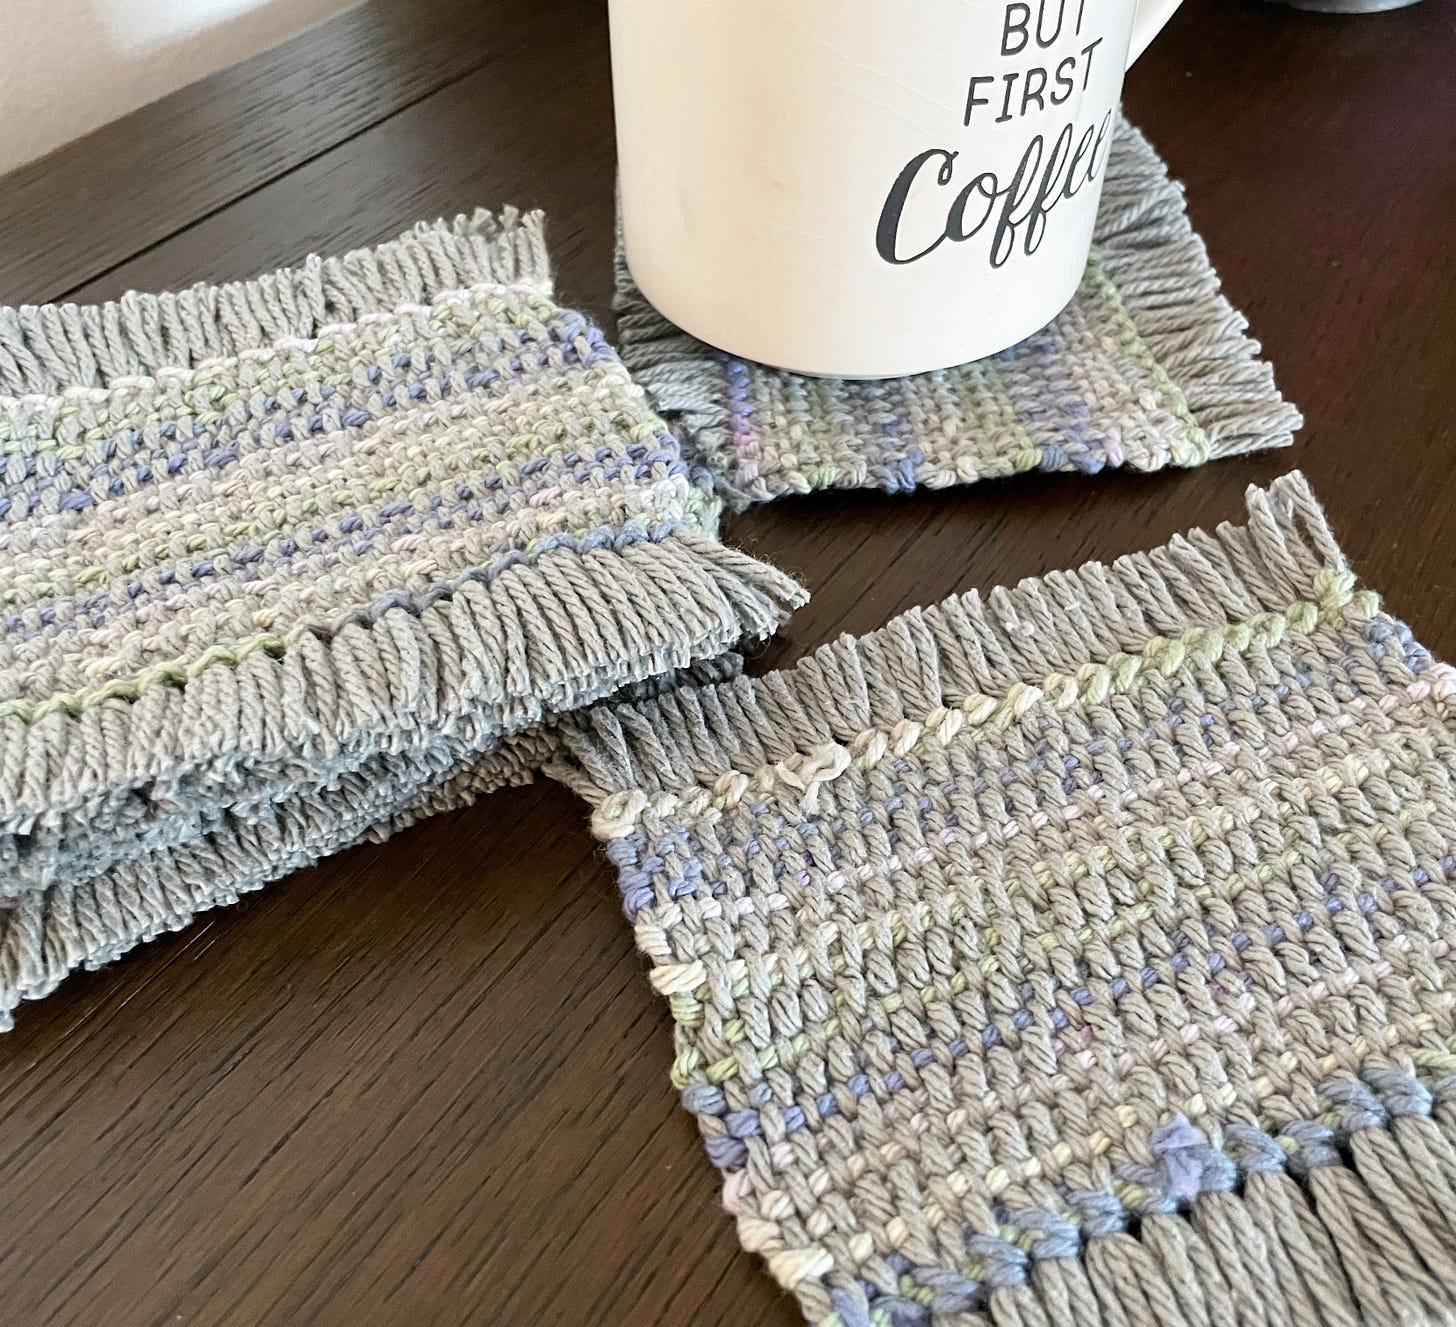 A stack of mug rugs on the left, one in the back with a mug on it, one in the front. Gray and muted colors. No diamonds.